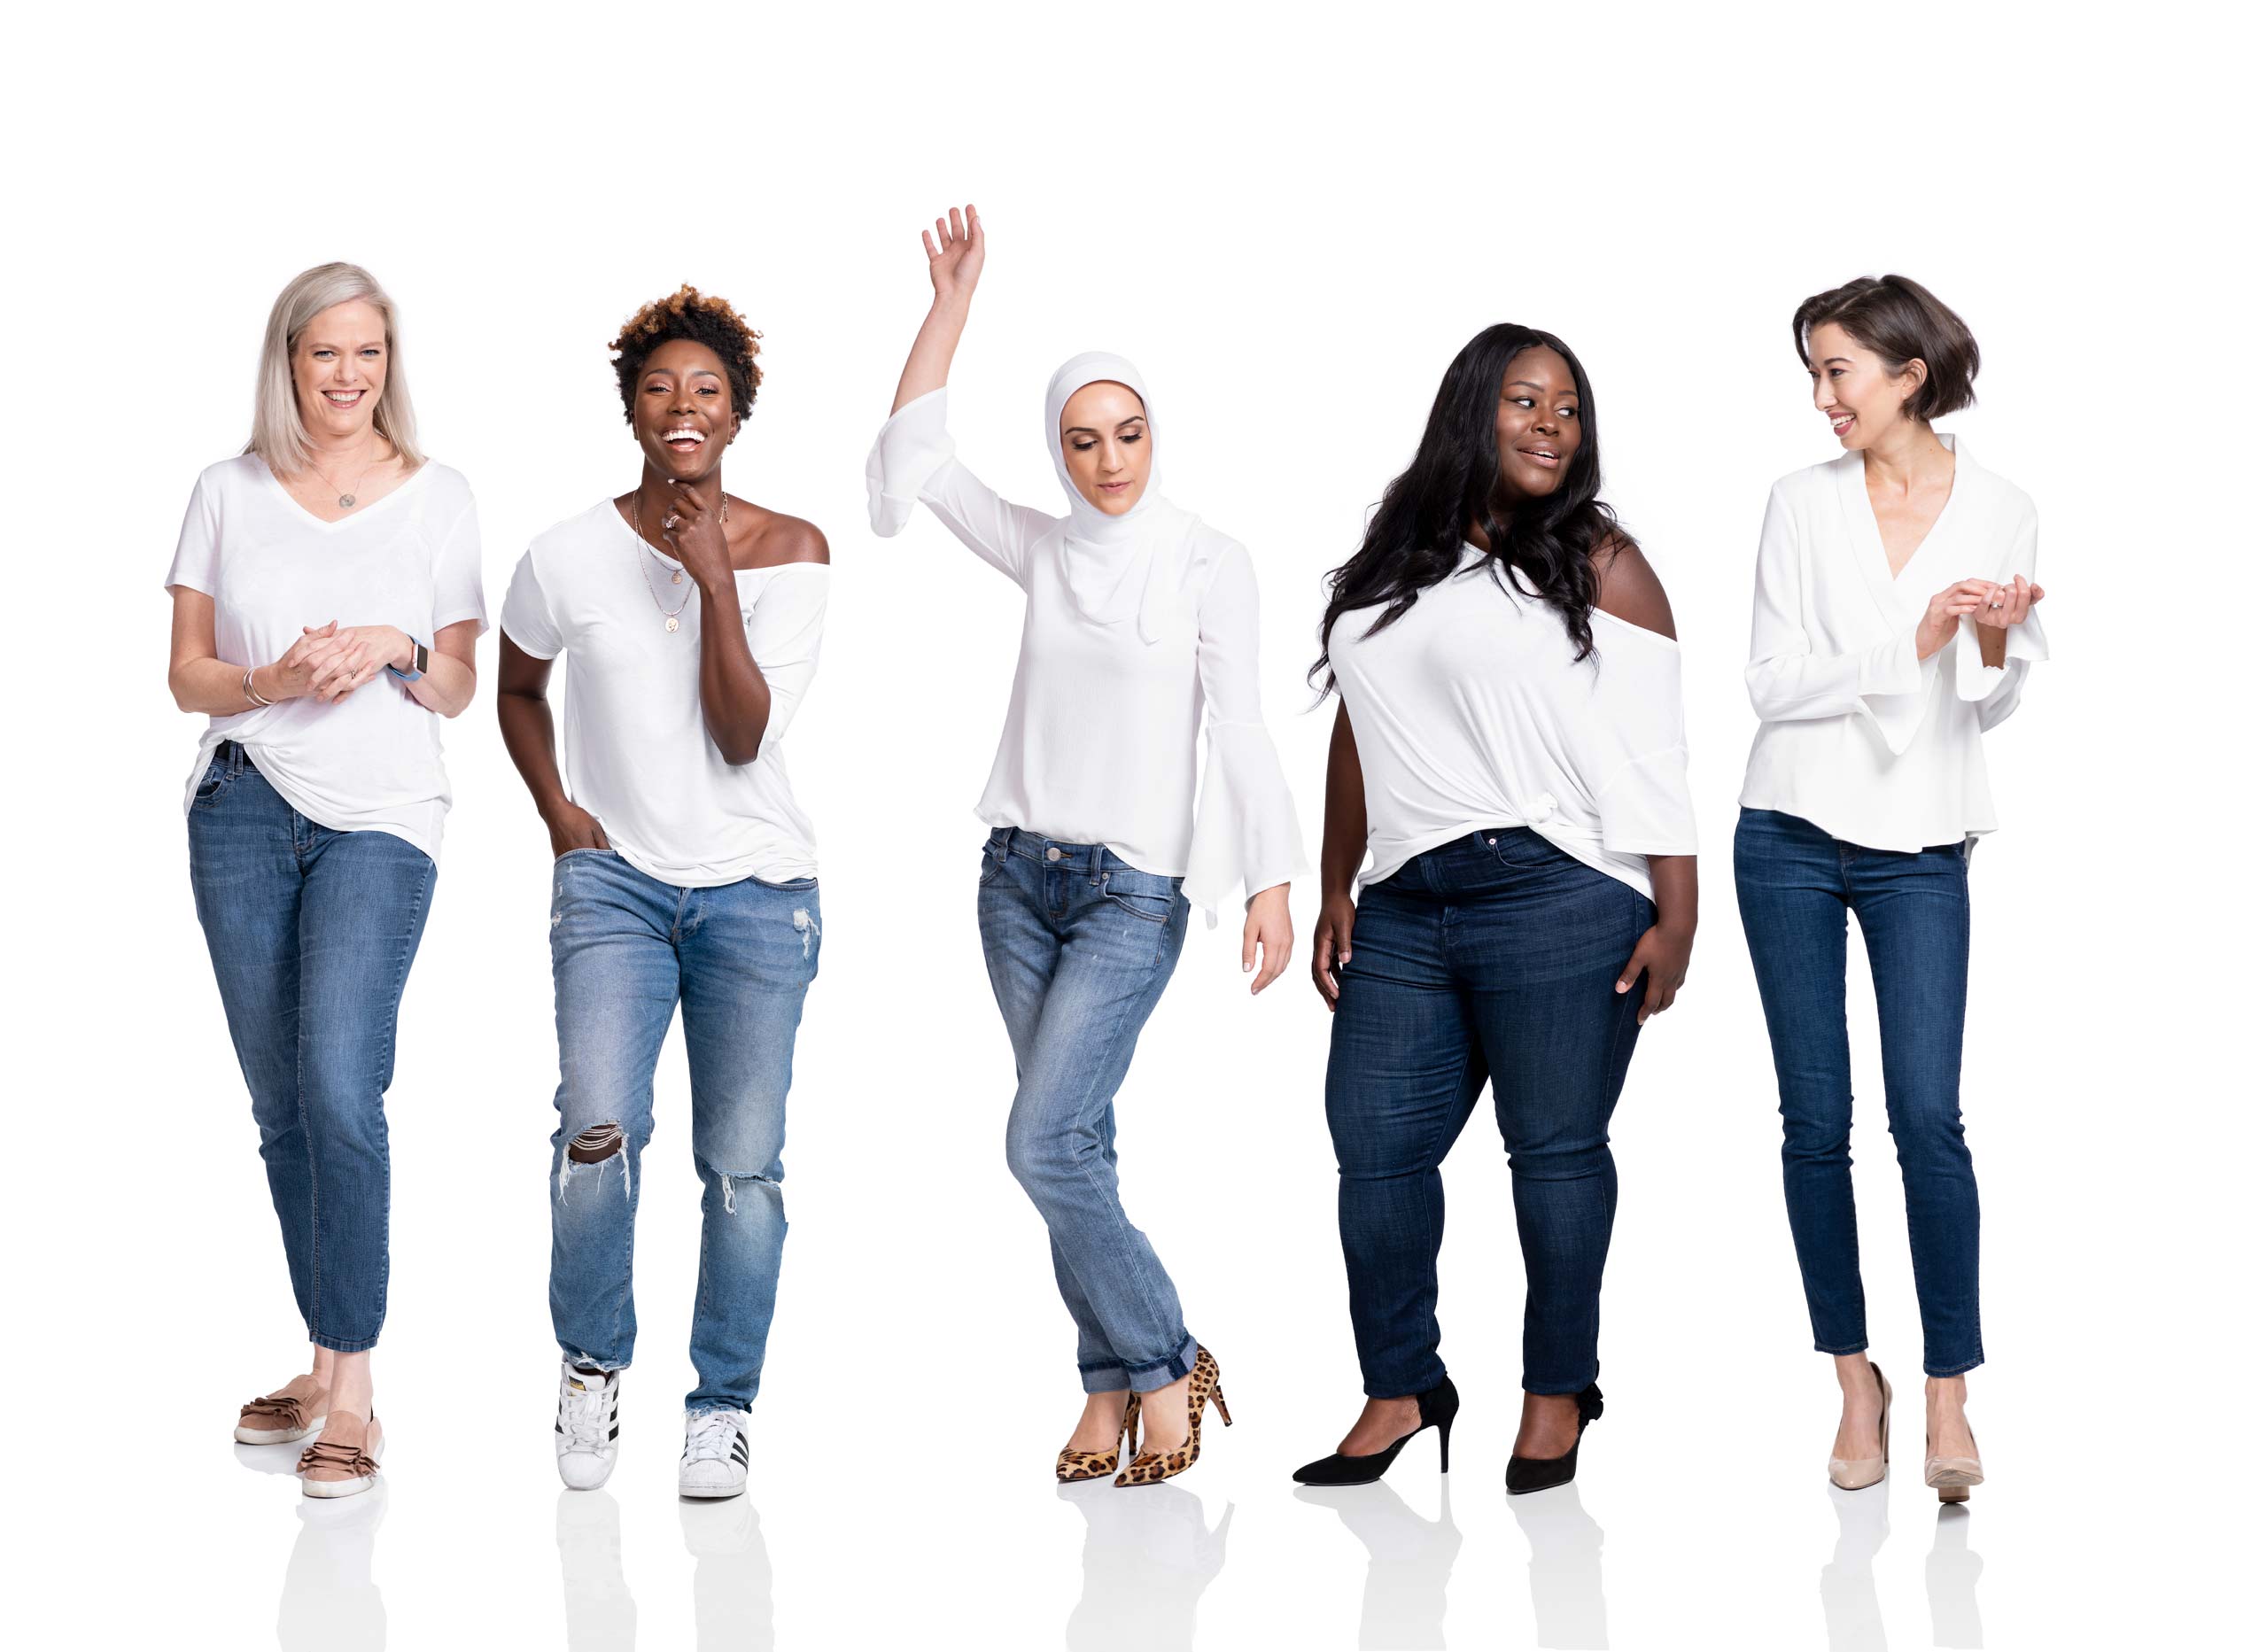 Five multicultural women wearing jeans and white tops on a white background